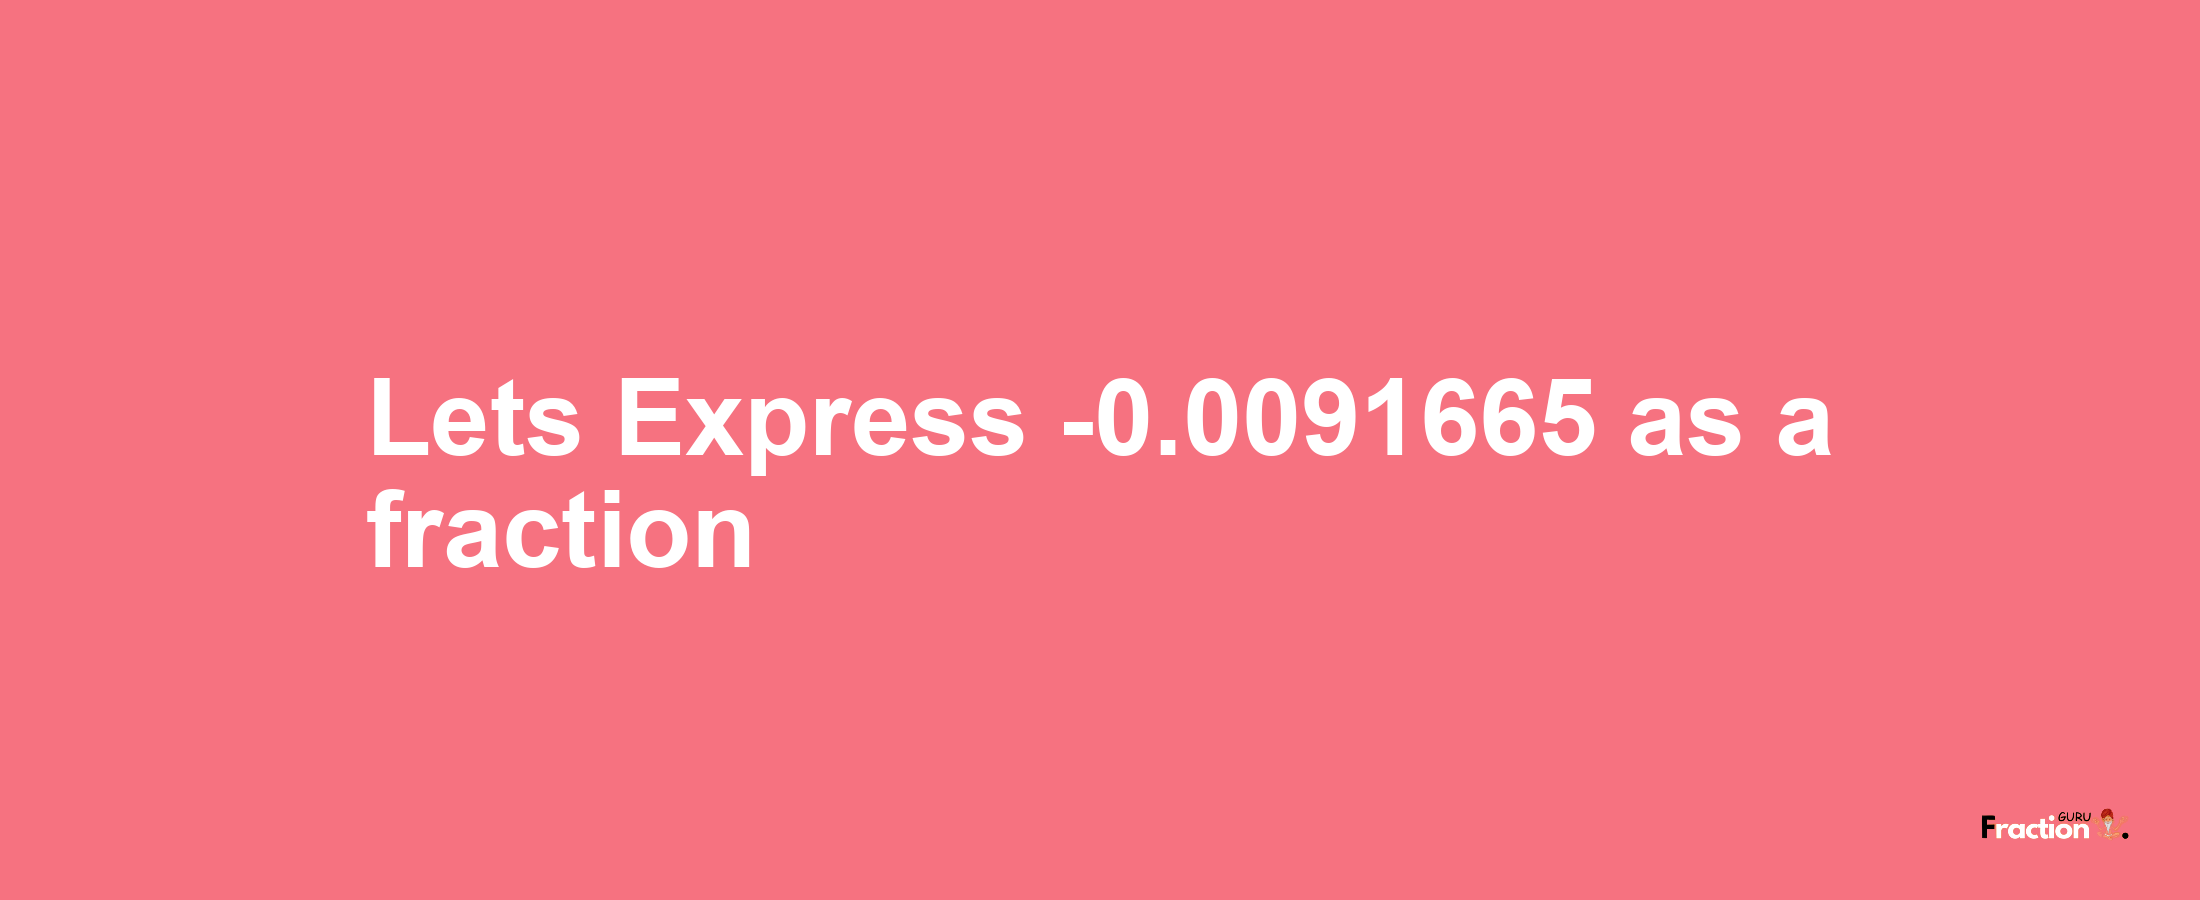 Lets Express -0.0091665 as afraction